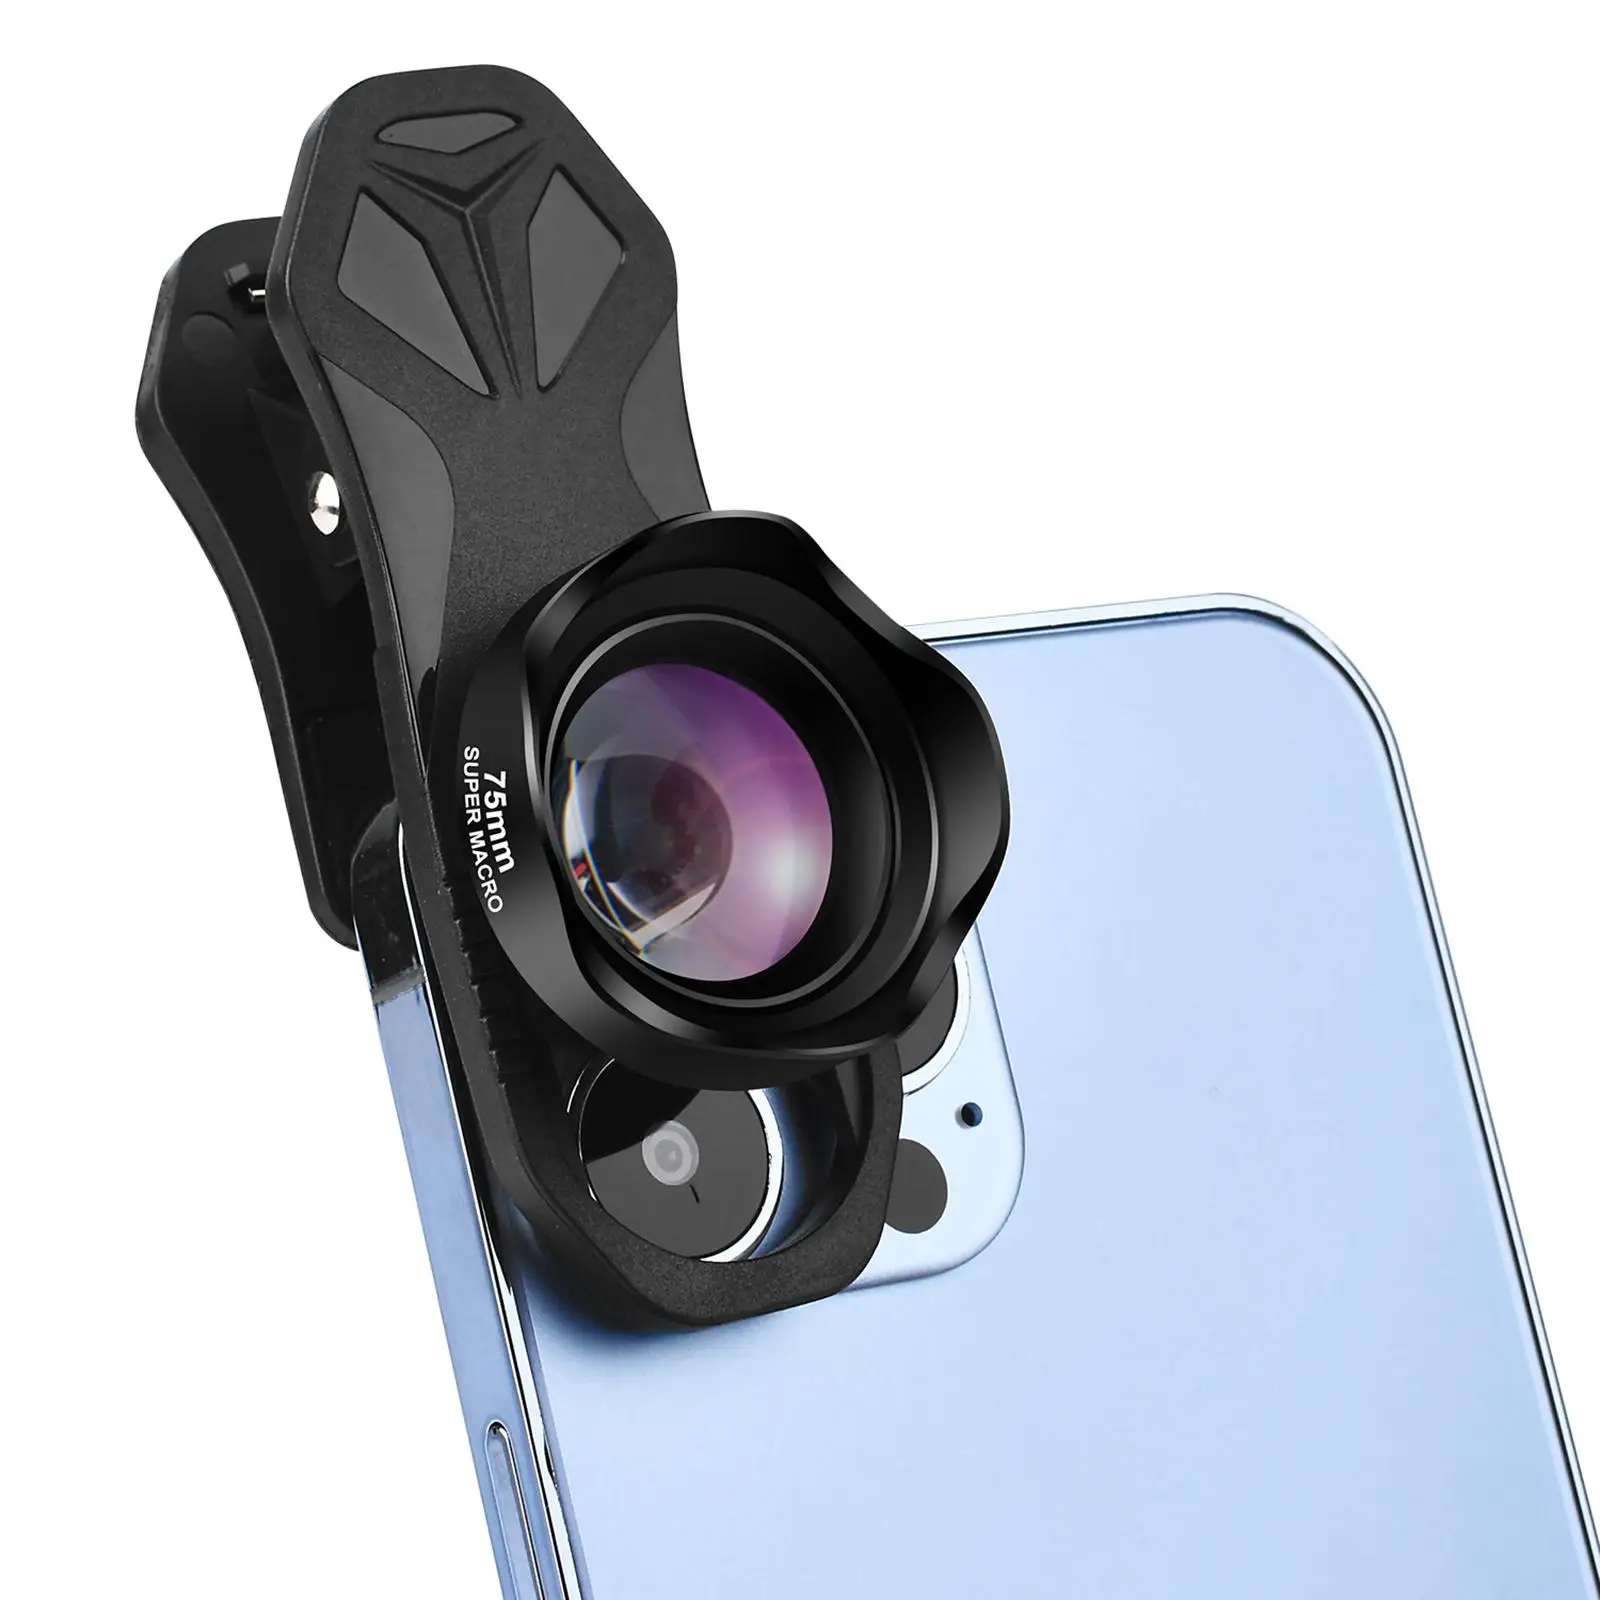 10x Macro Lens Camera 75mm HD Clip On Phone Lens for Most Smartphones Android iOS